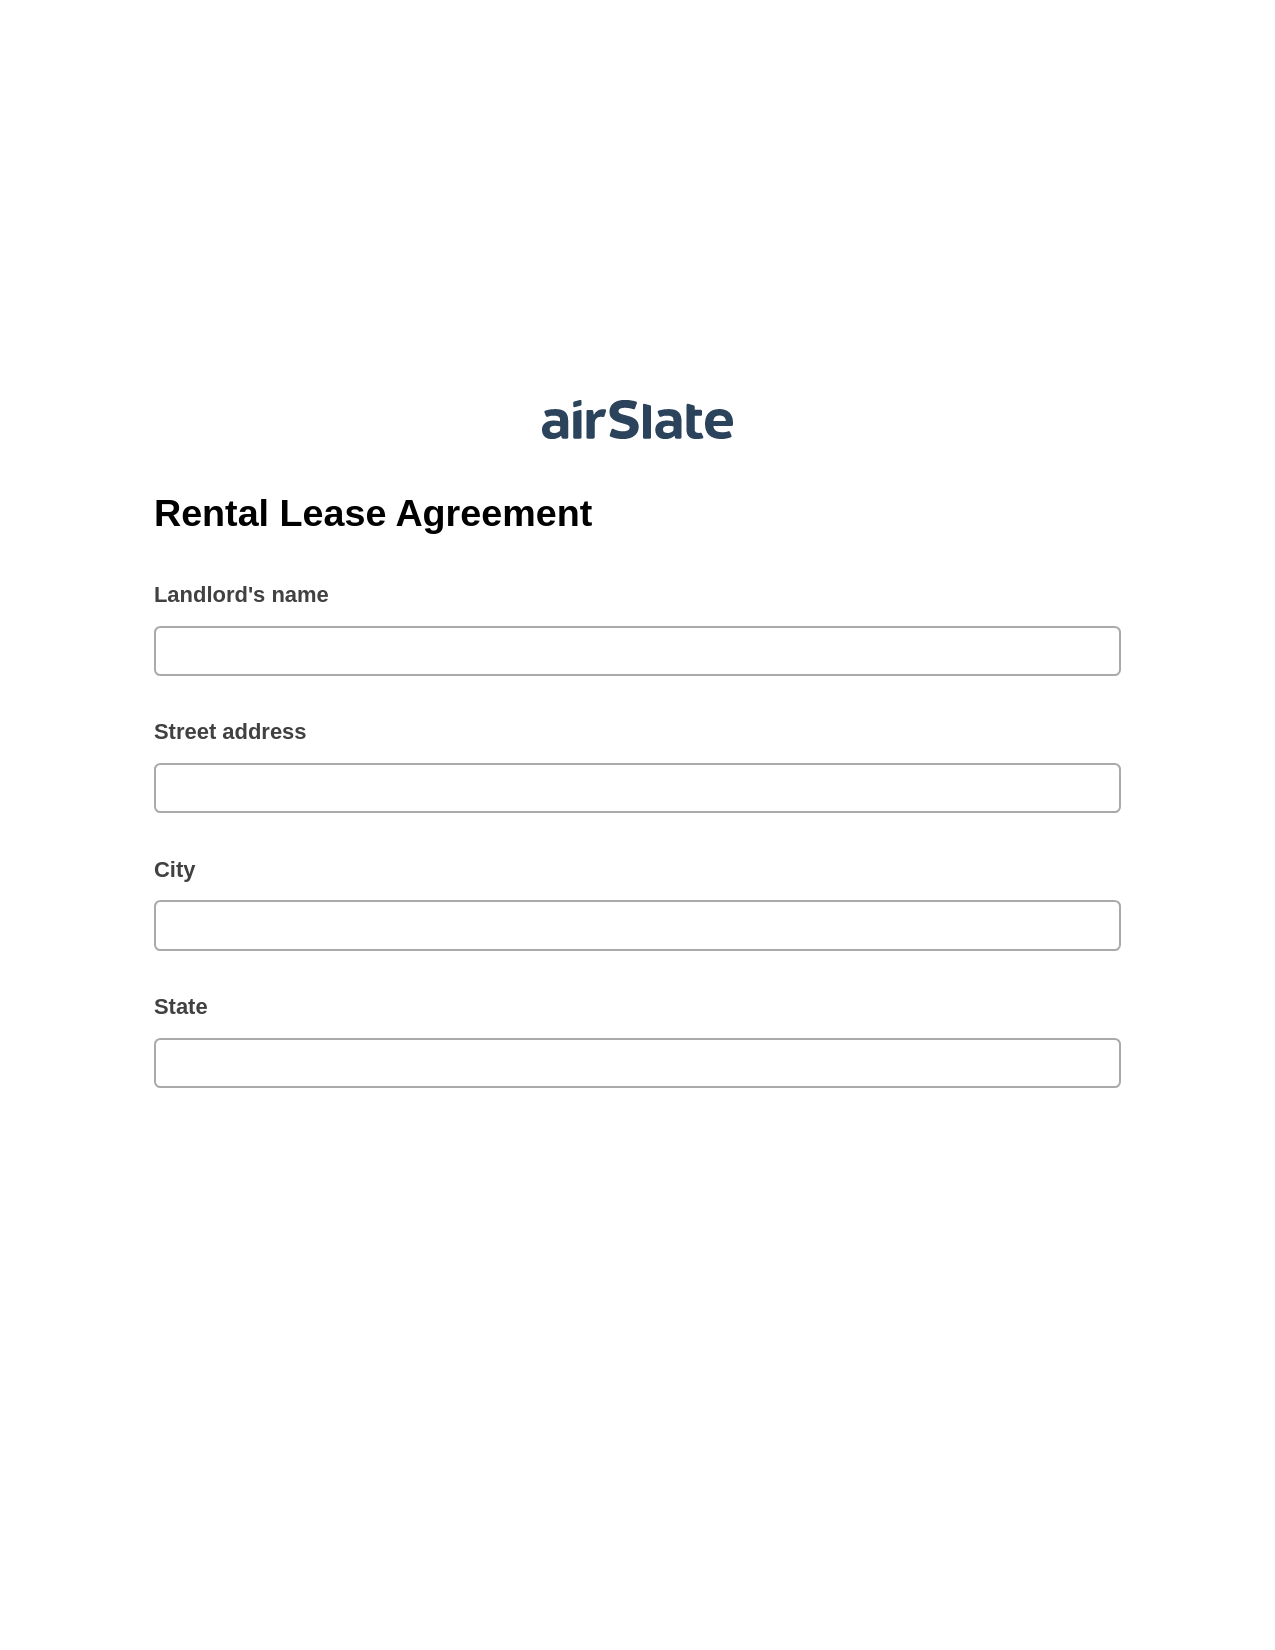 Multirole Rental Lease Agreement Pre-fill from Google Sheet Dropdown Options Bot, In-person Signing Bot, Box Bot